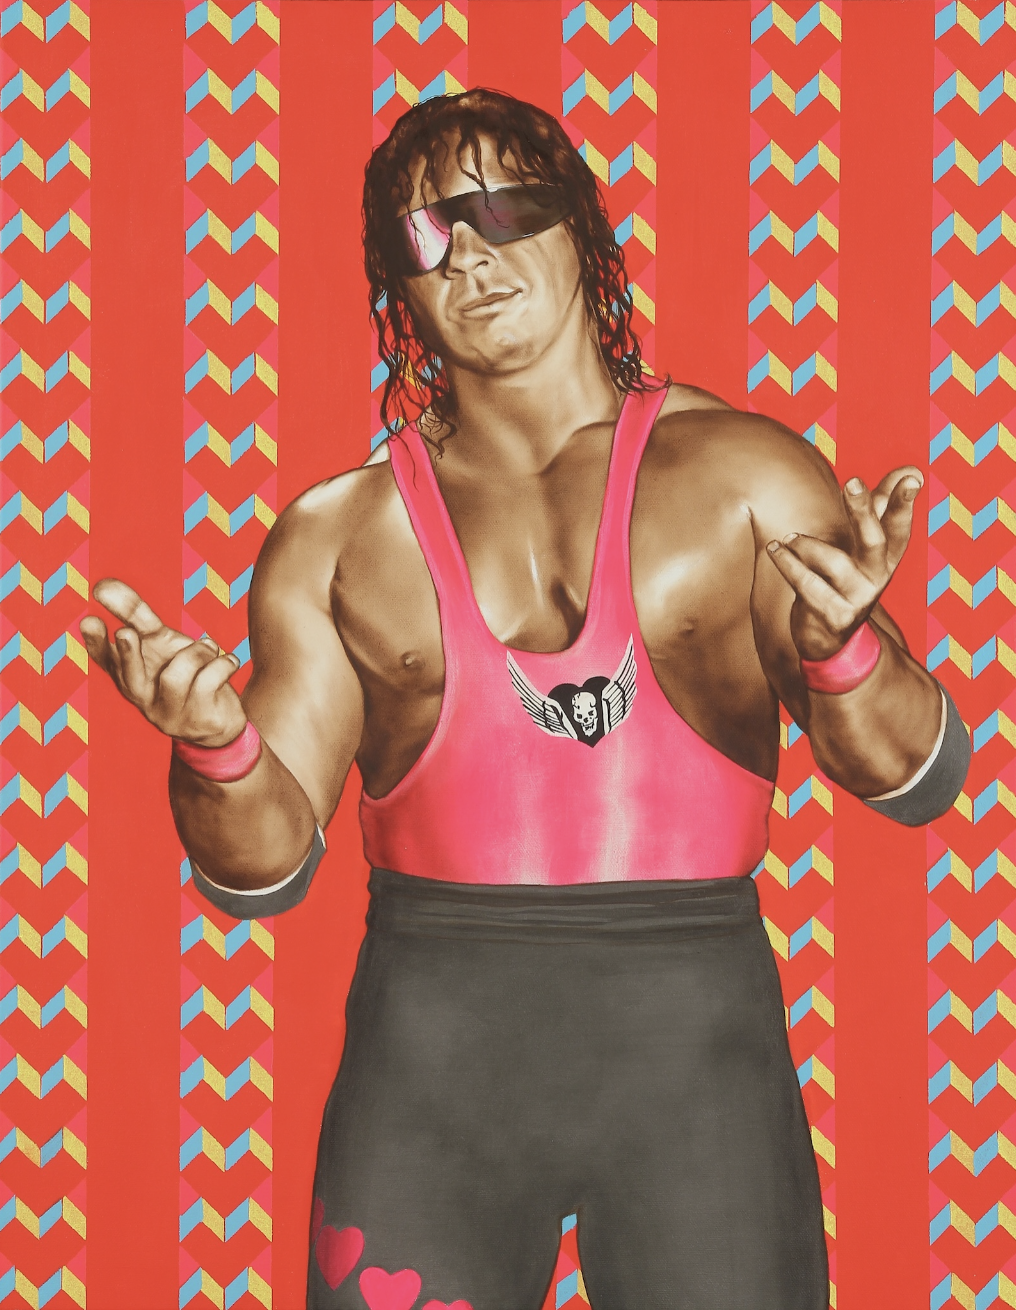 A brightly colored painting of a spandex-clad wrestler from the 1980s in front of a bright red background.